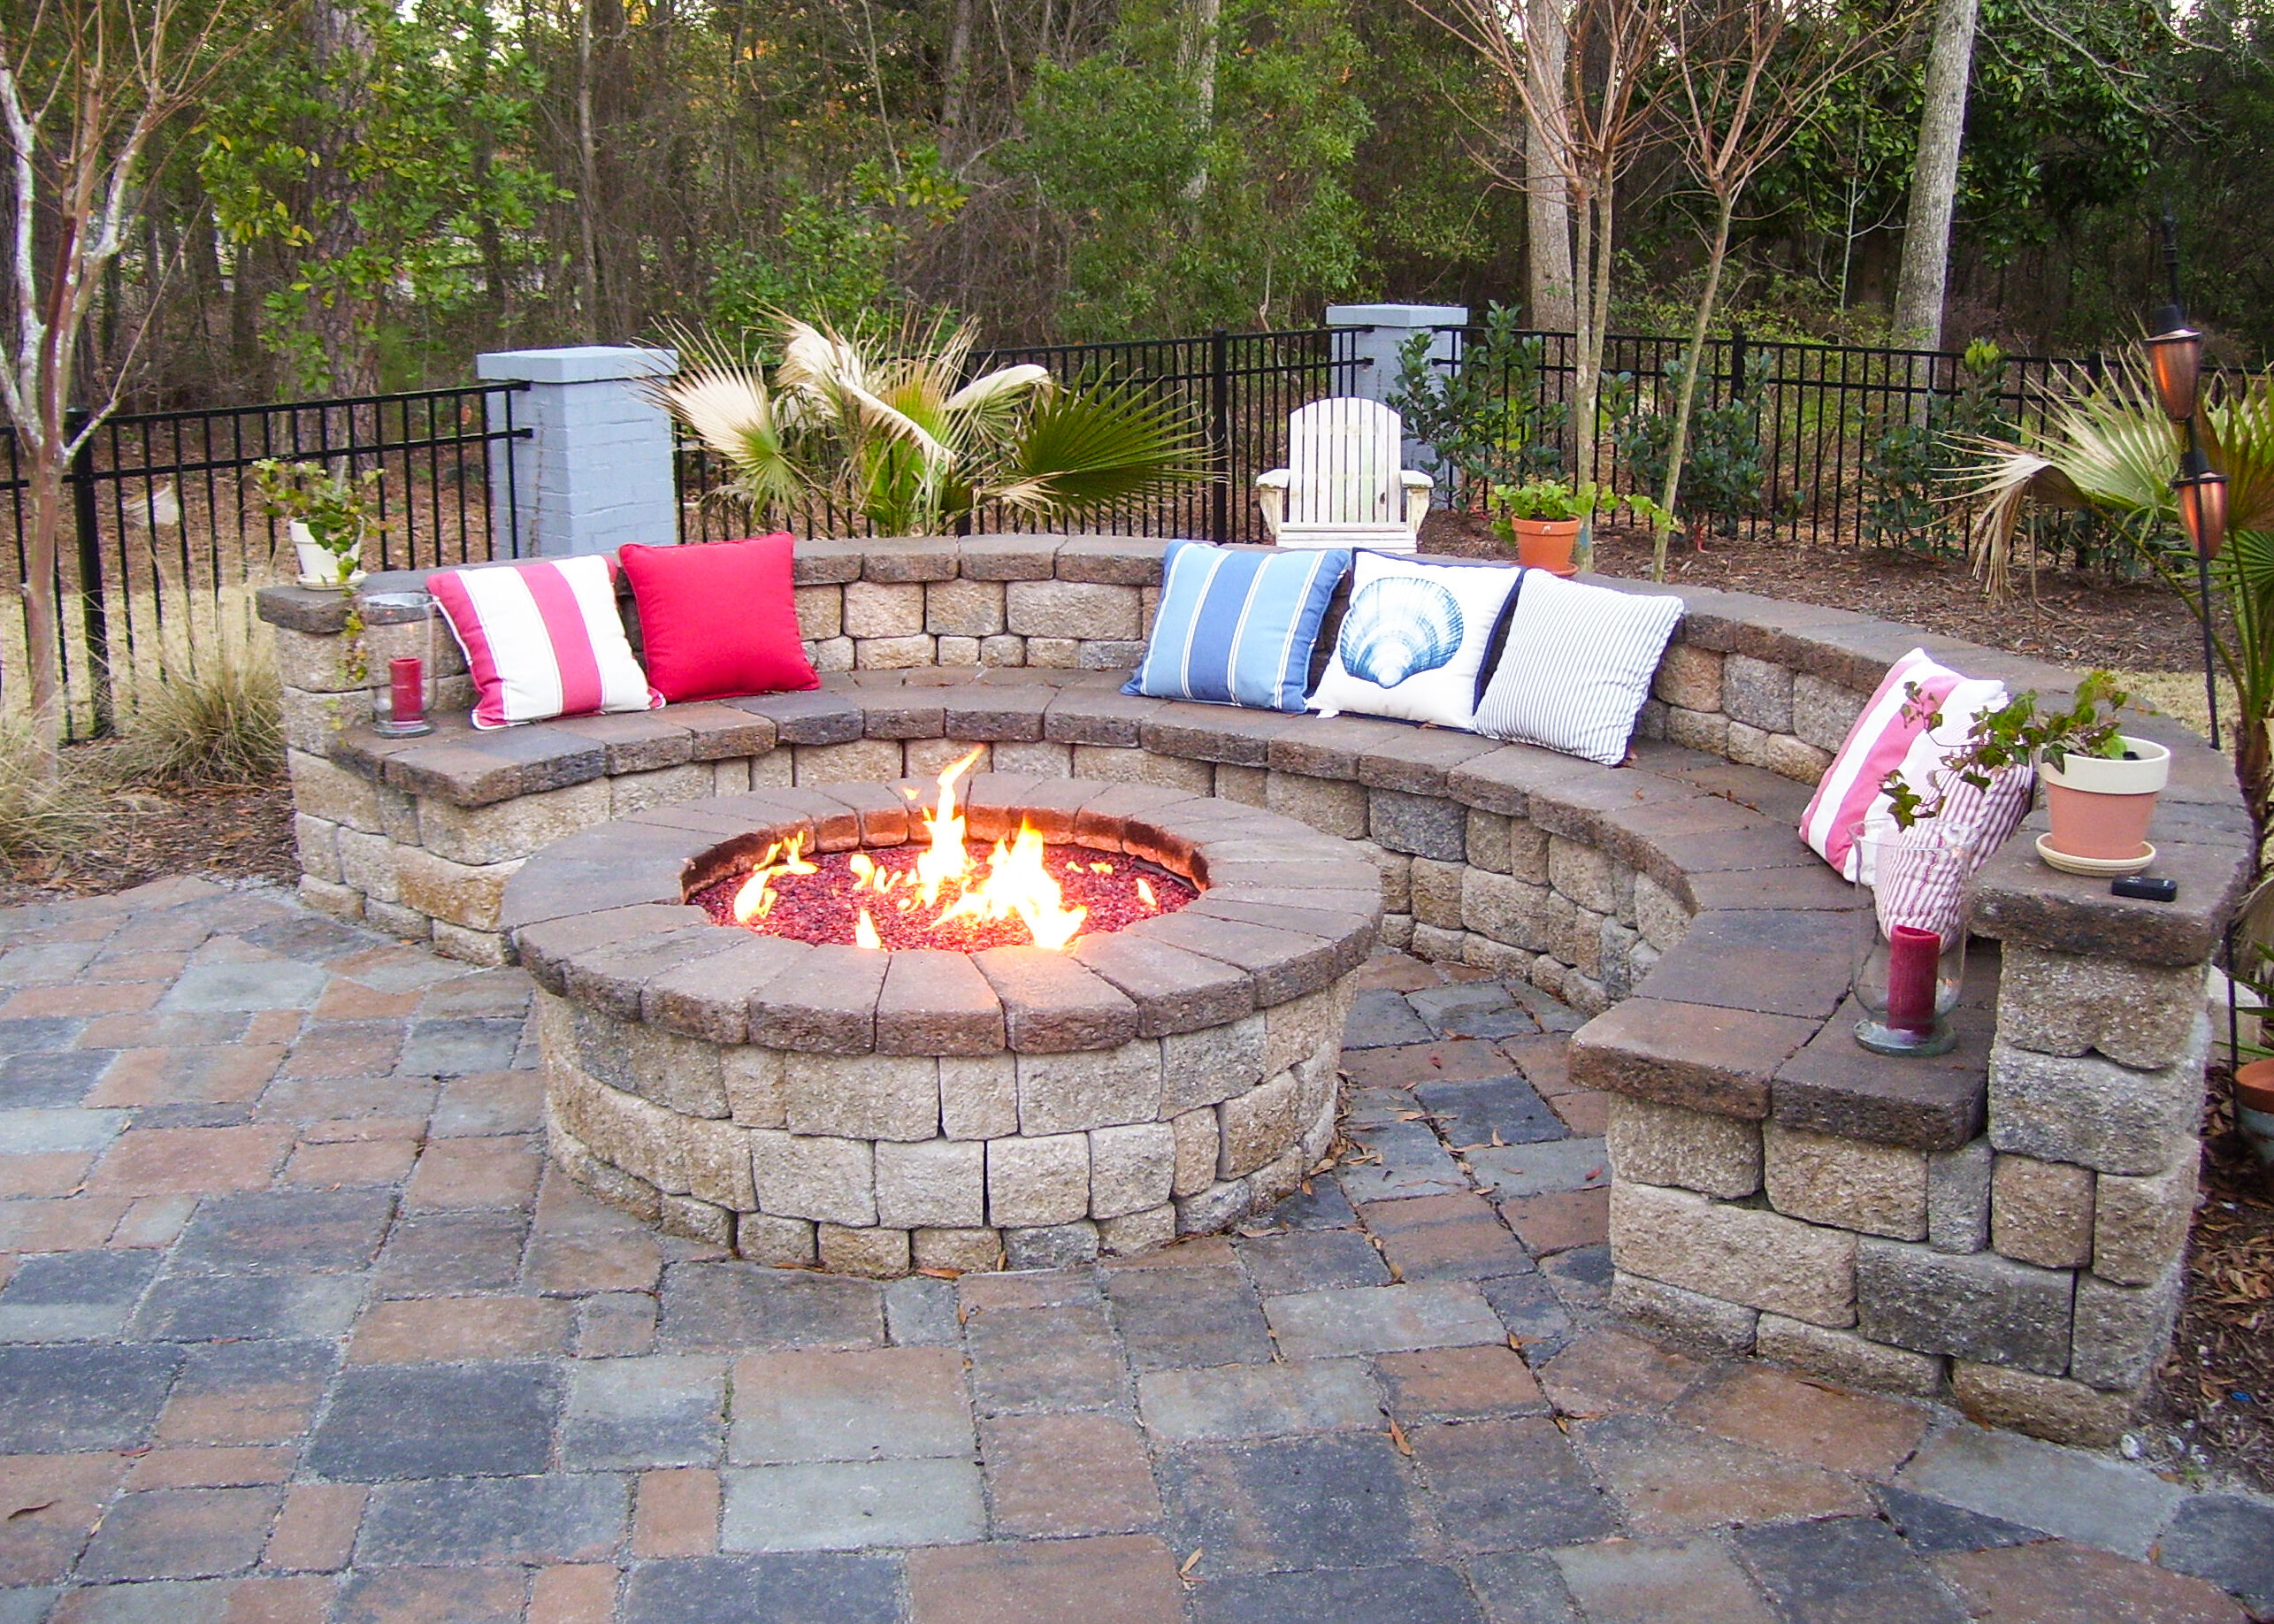 3 Easy Diy Fire Pit Ideas, Outdoor Fire Pit Homemade